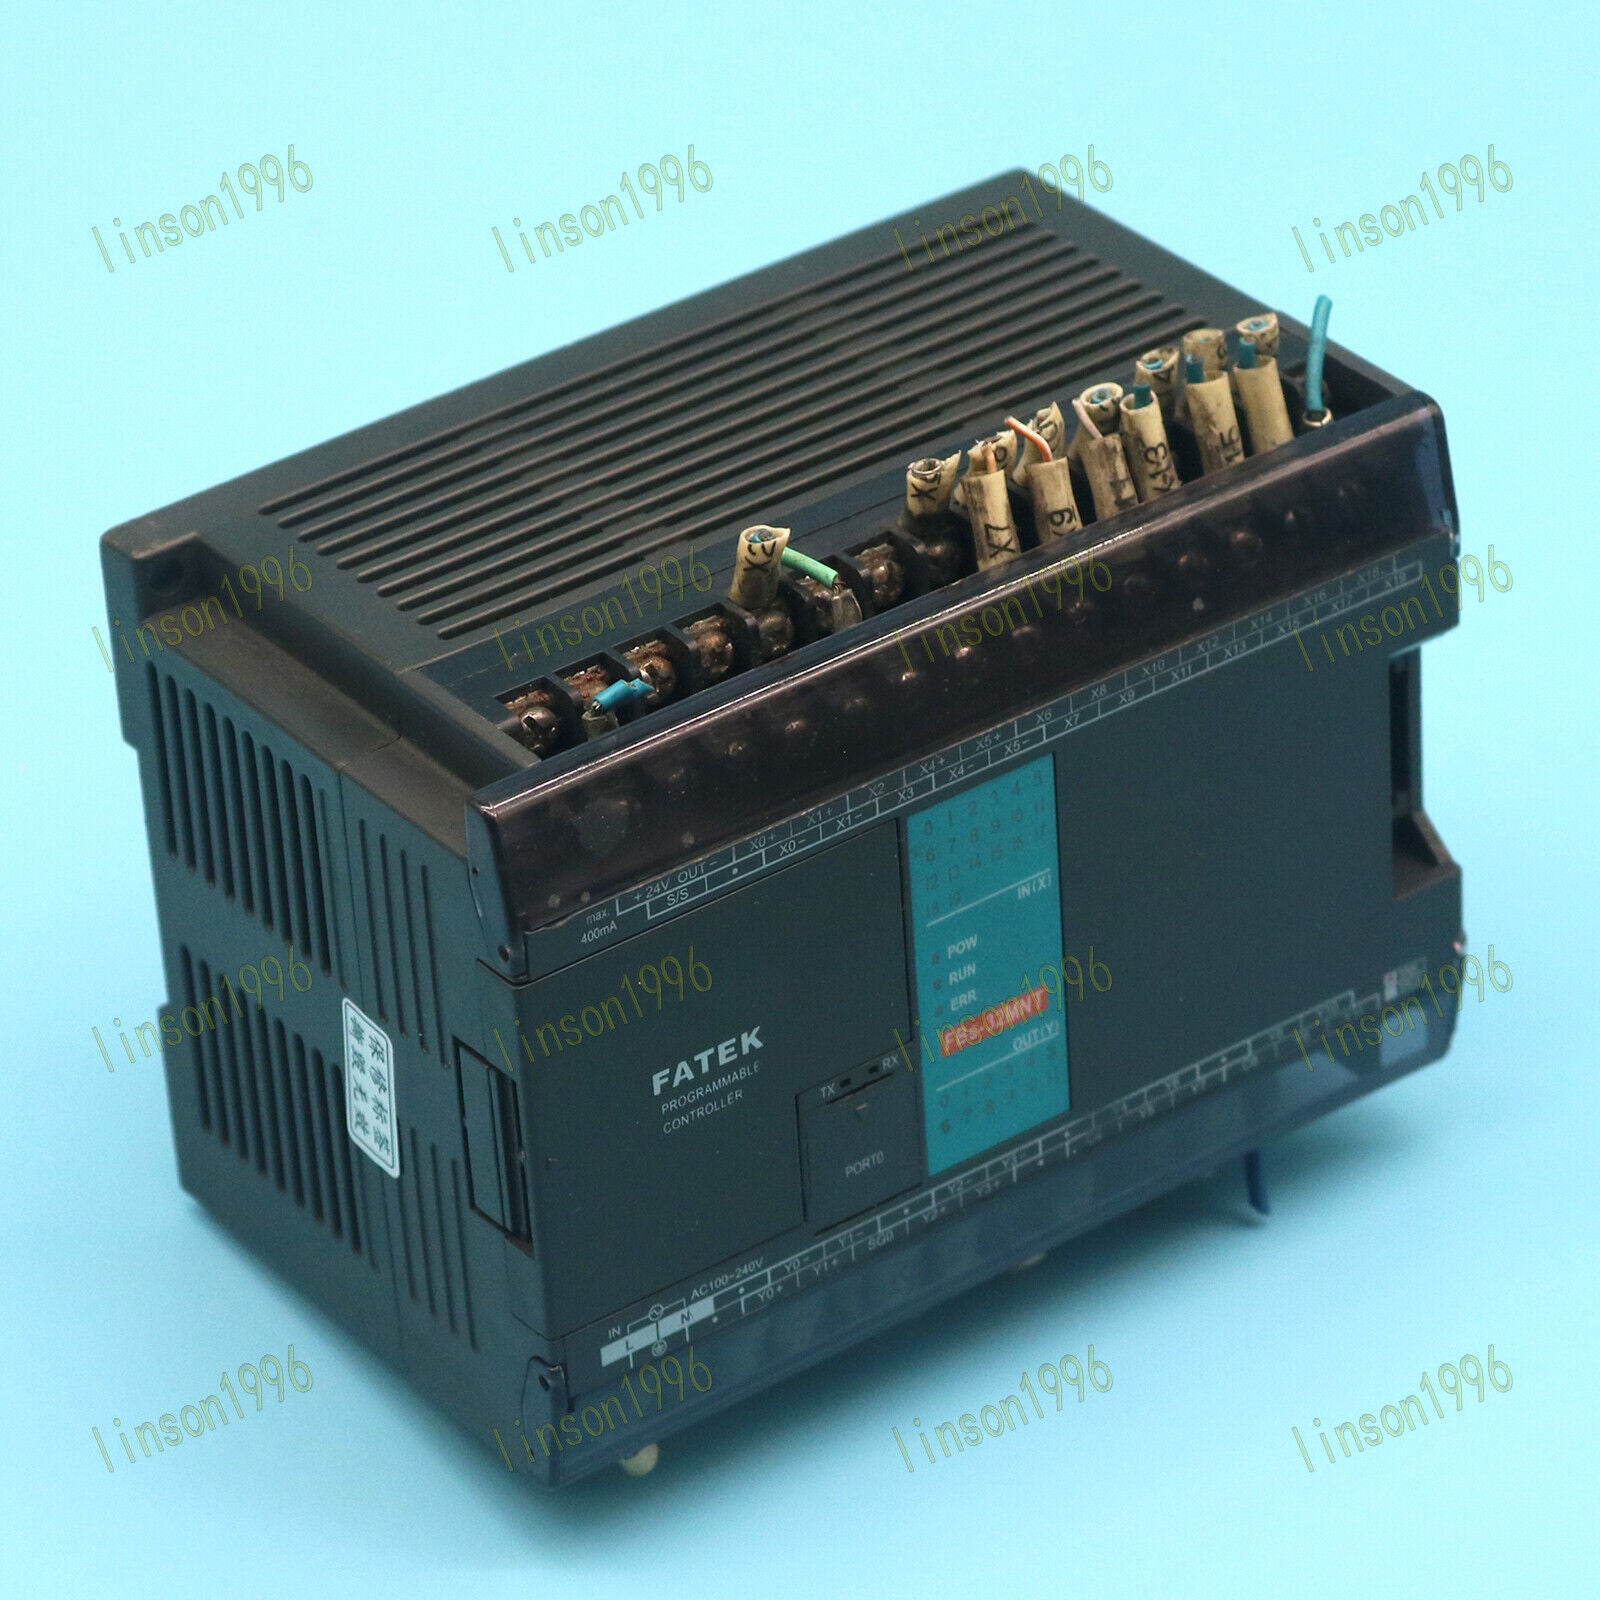 used ONE  FATEK FBS-32MNT PLC Programmable Controller Tested It In OK